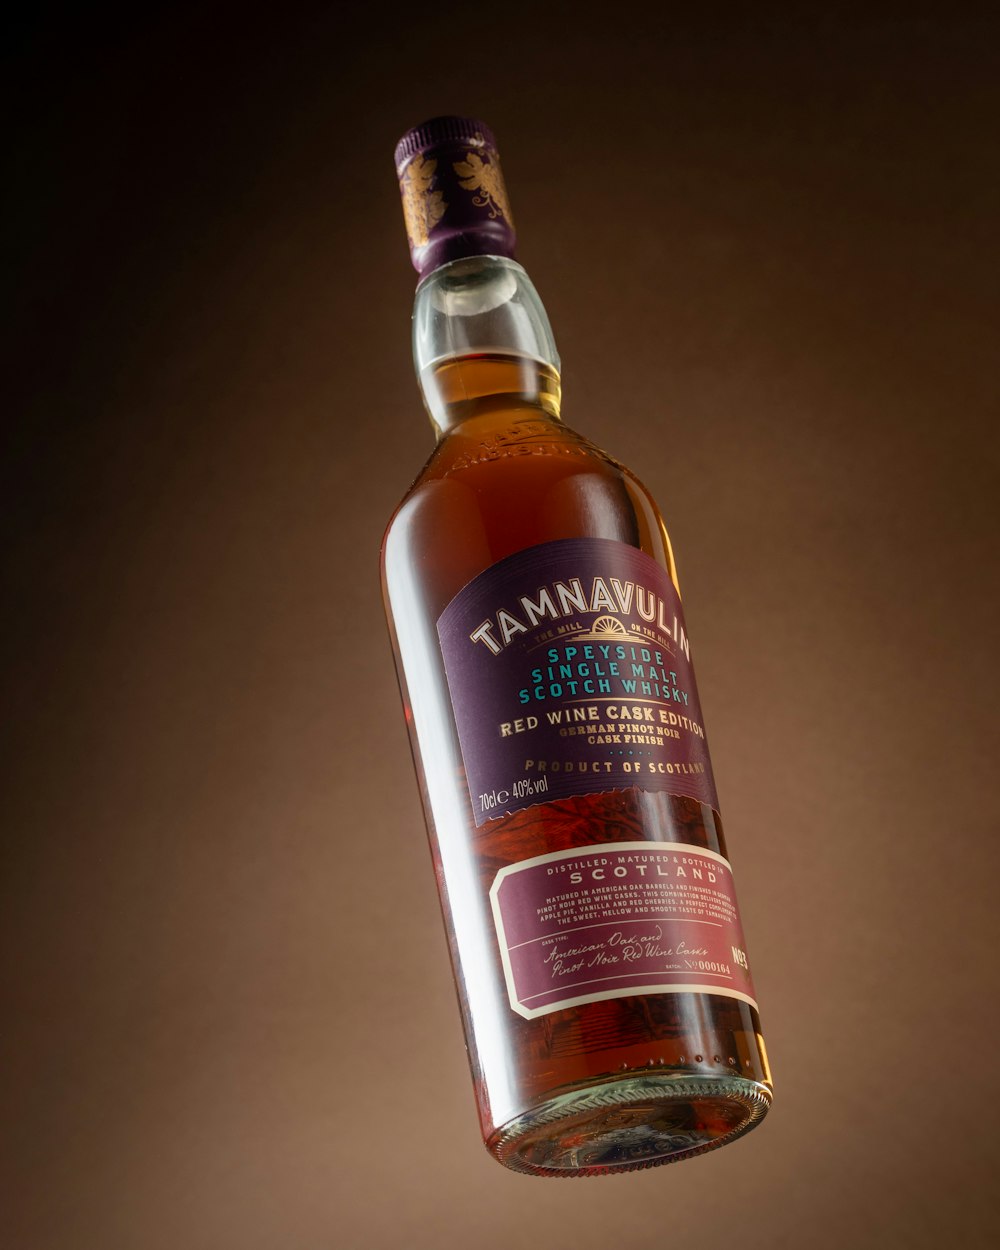 a bottle of tannaurine on a brown background